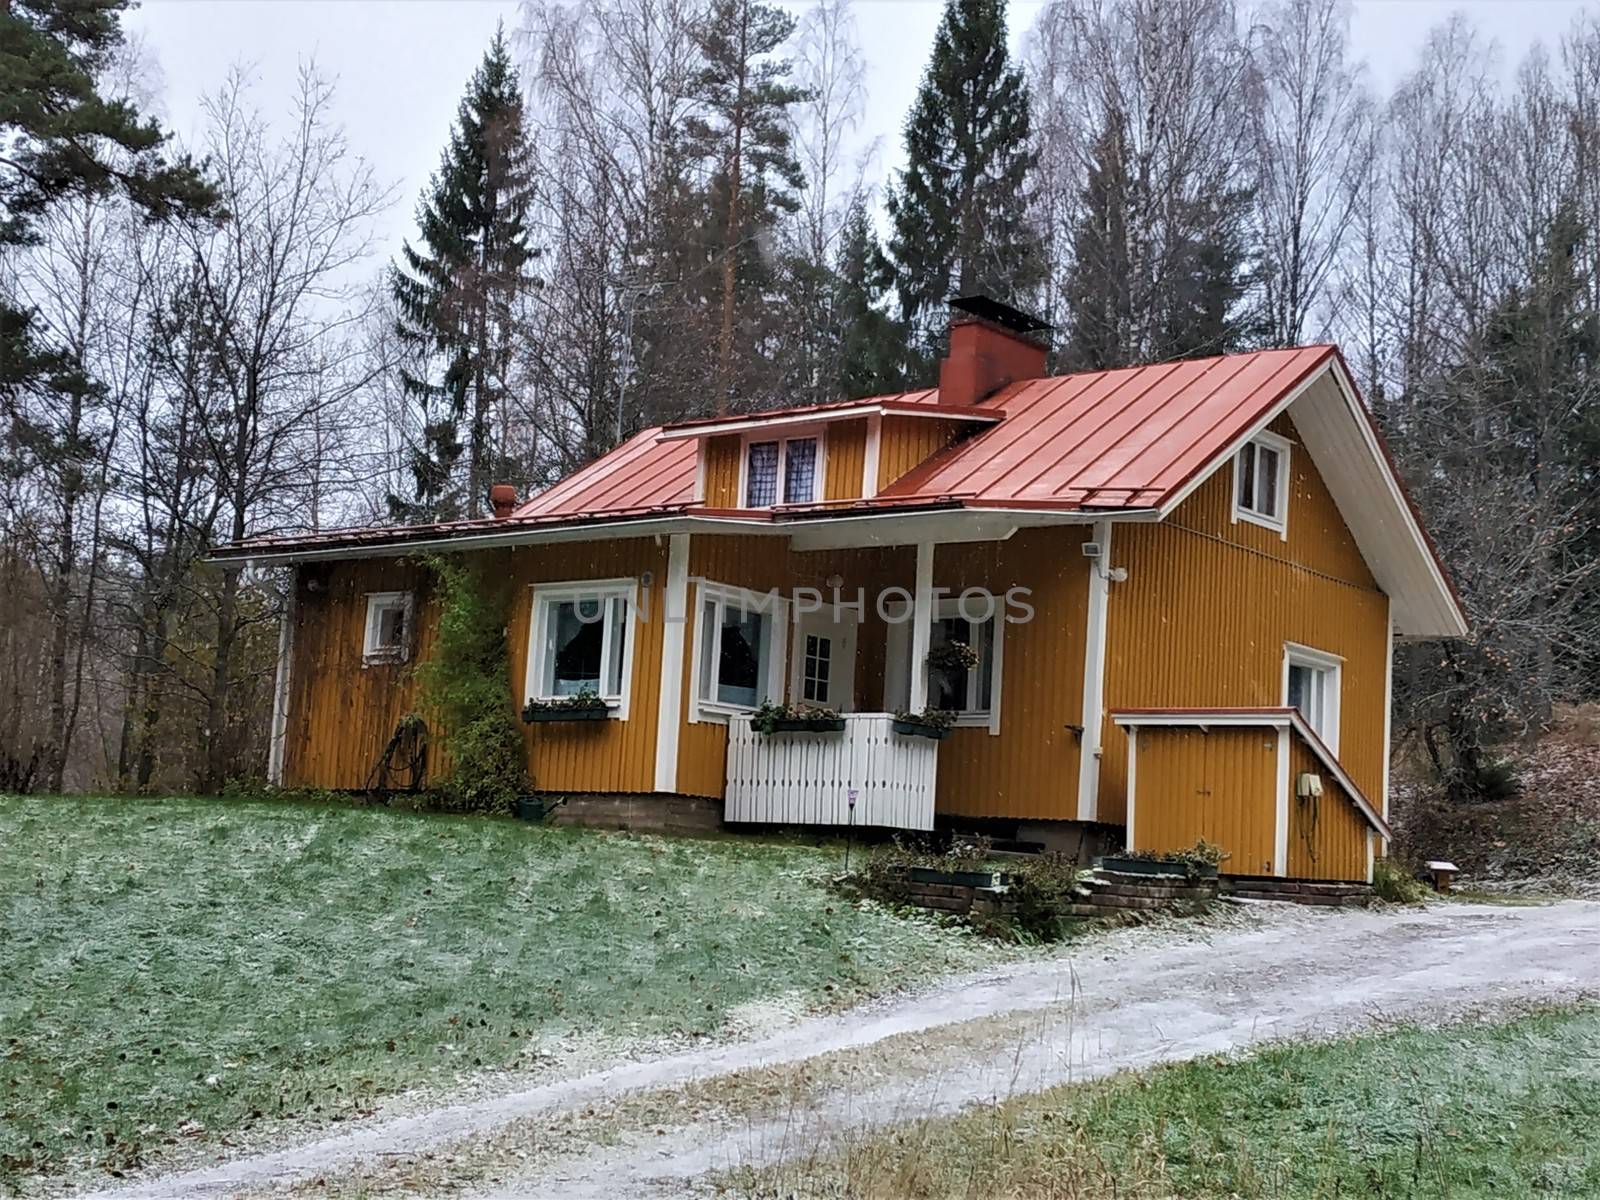 Traditional yellow wooden house in the Nuuksio National Park, Finland